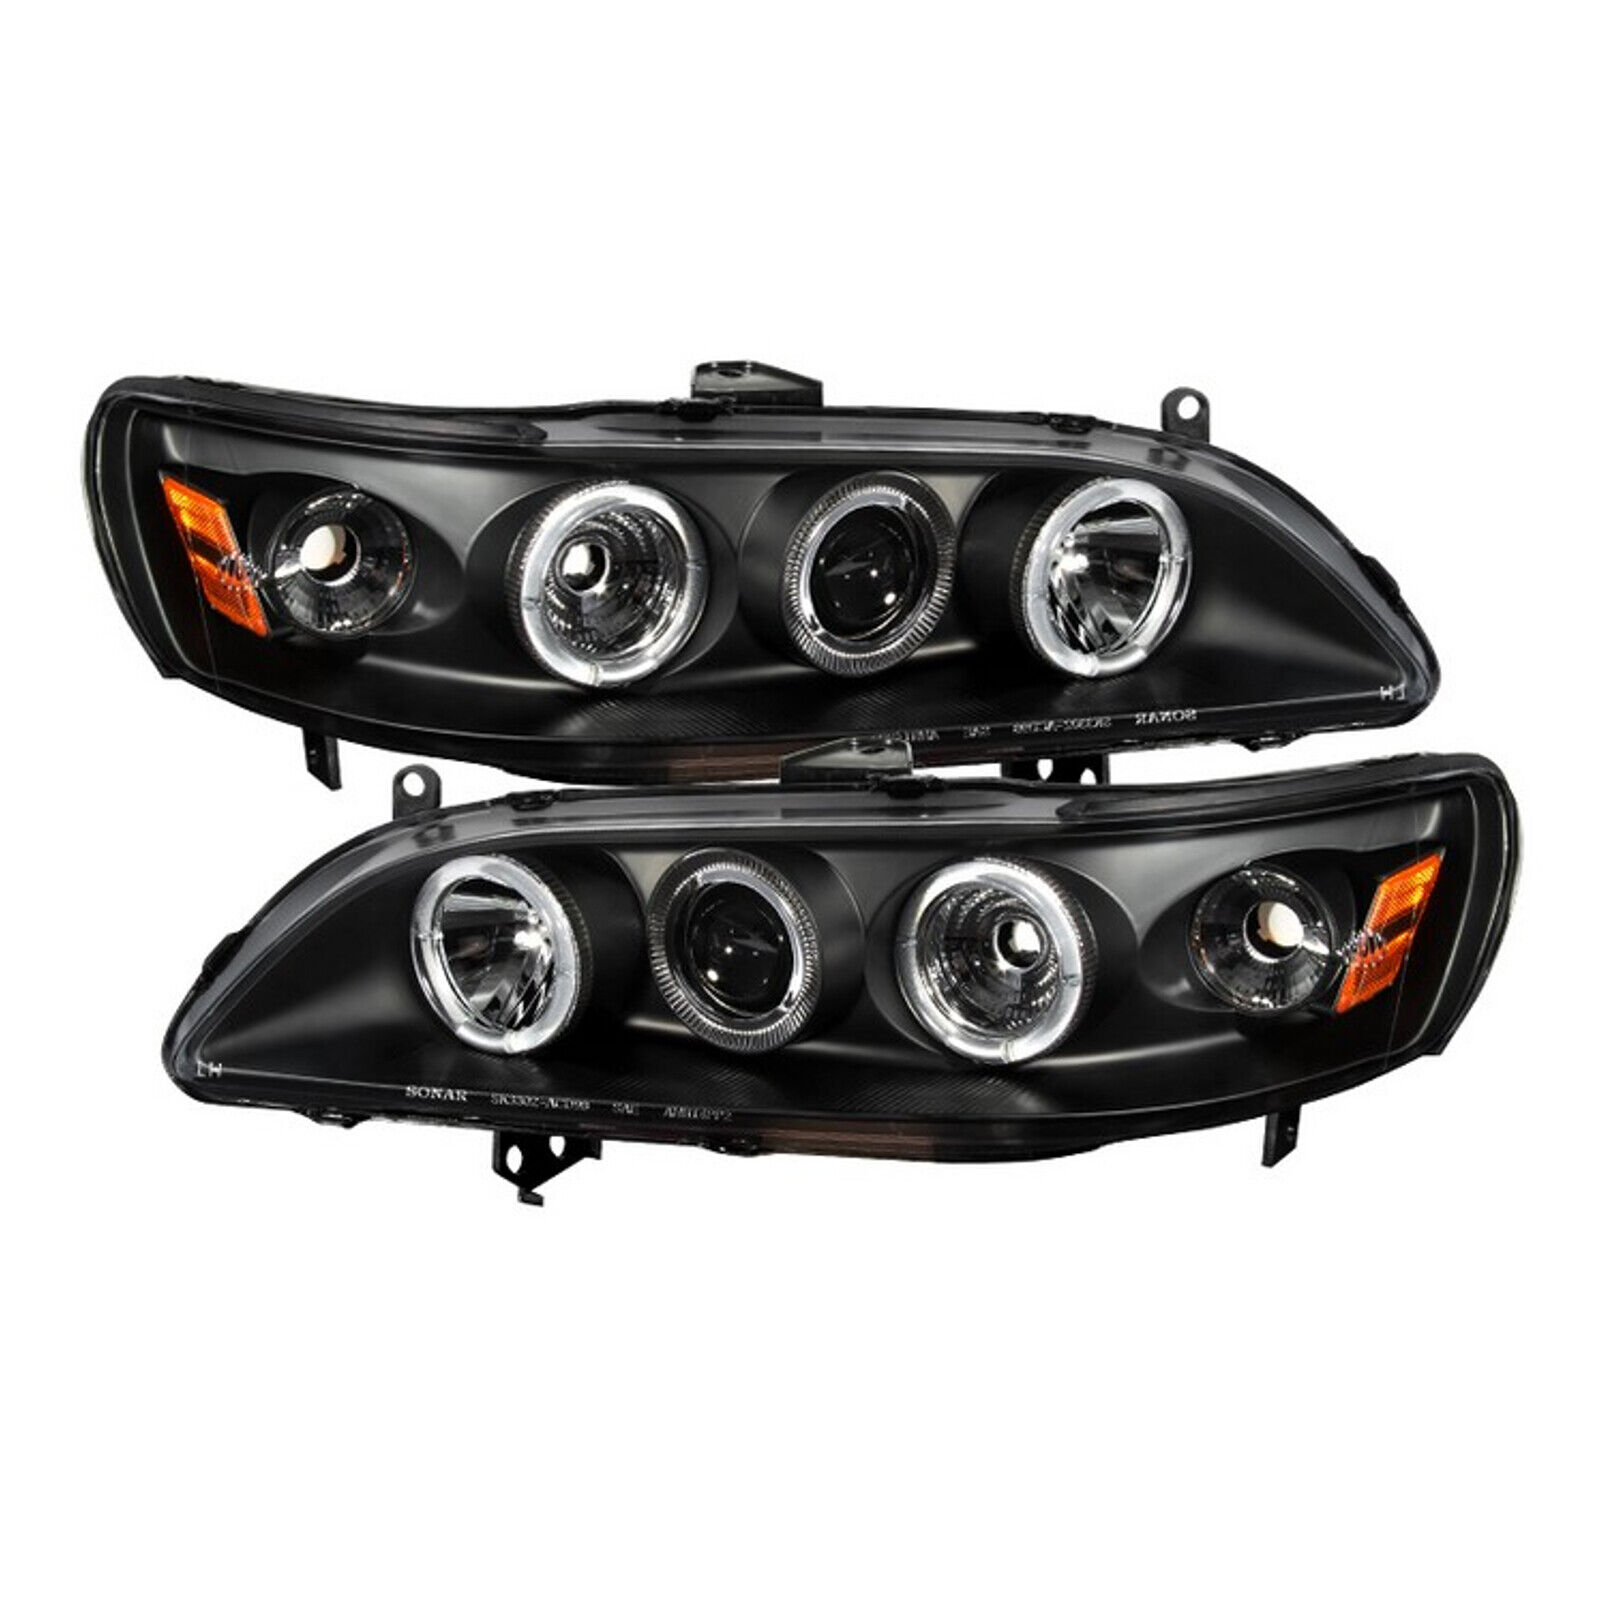 SPYDER PRO YD HA98 AM BK Set of 2 LED Halo Projector Headlights for 98-02 Accord